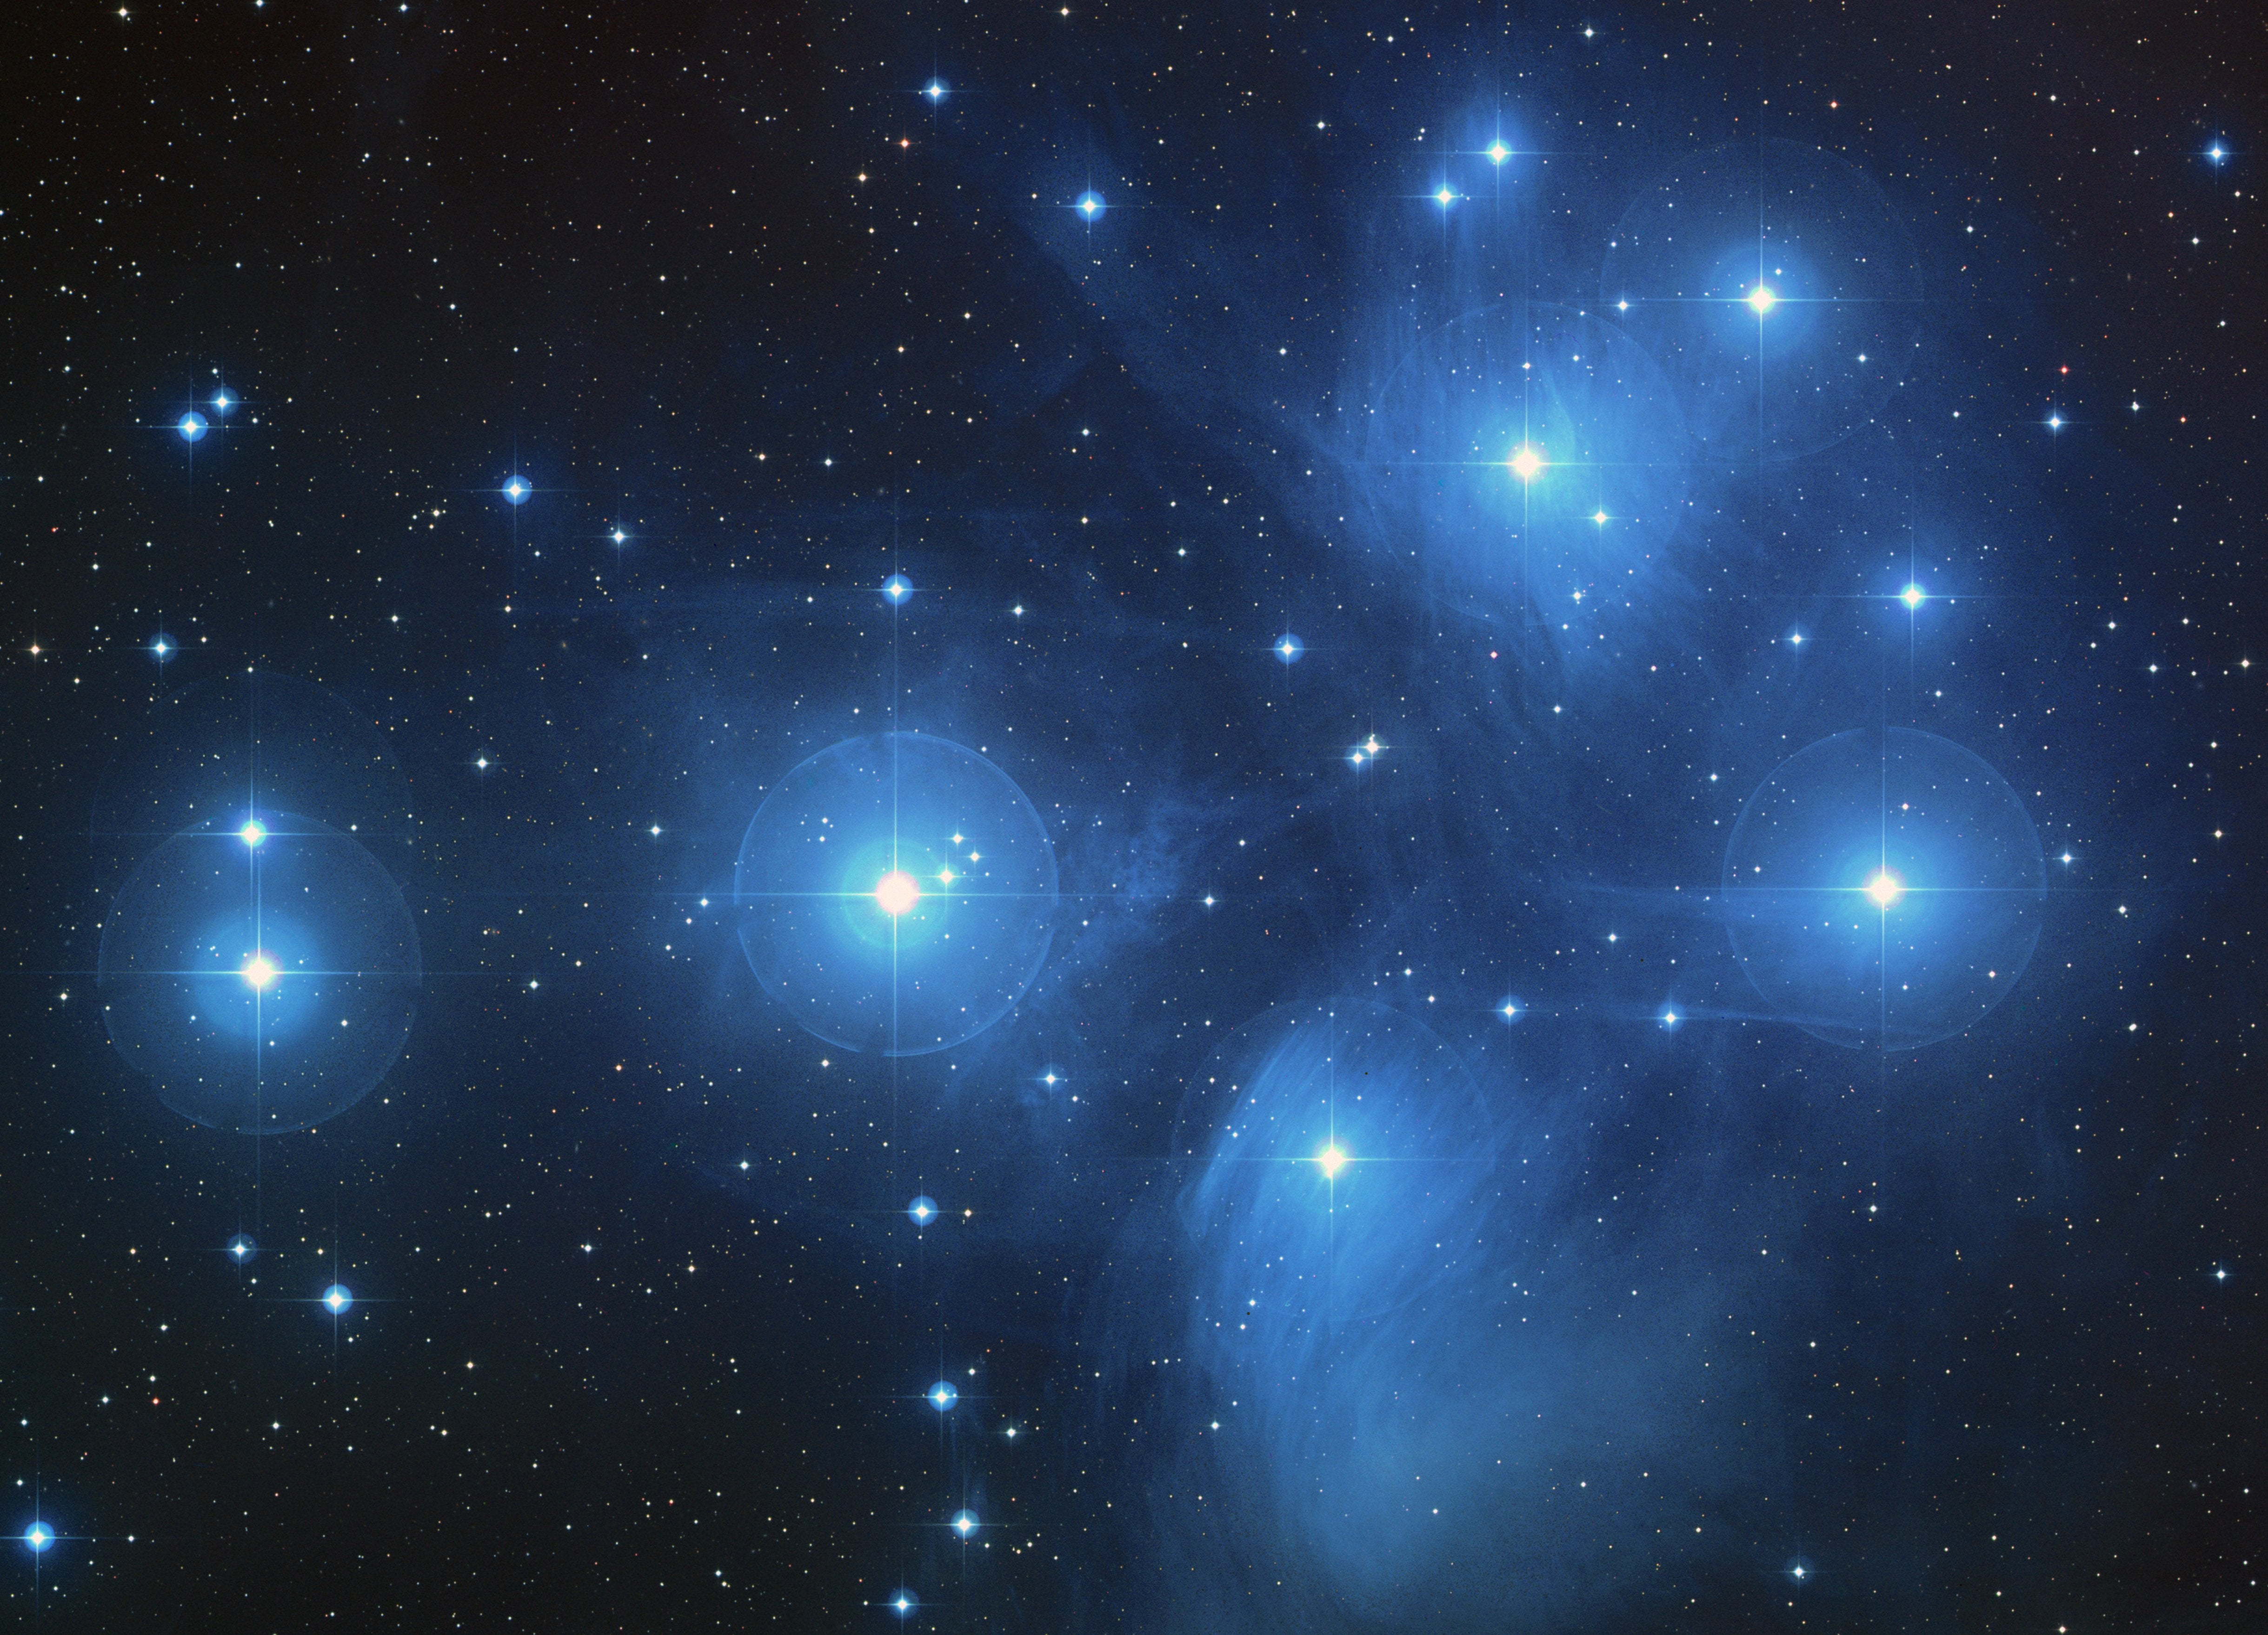 They are called the Seven Sisters – but in reality there are hundreds of stars in the Pleiades